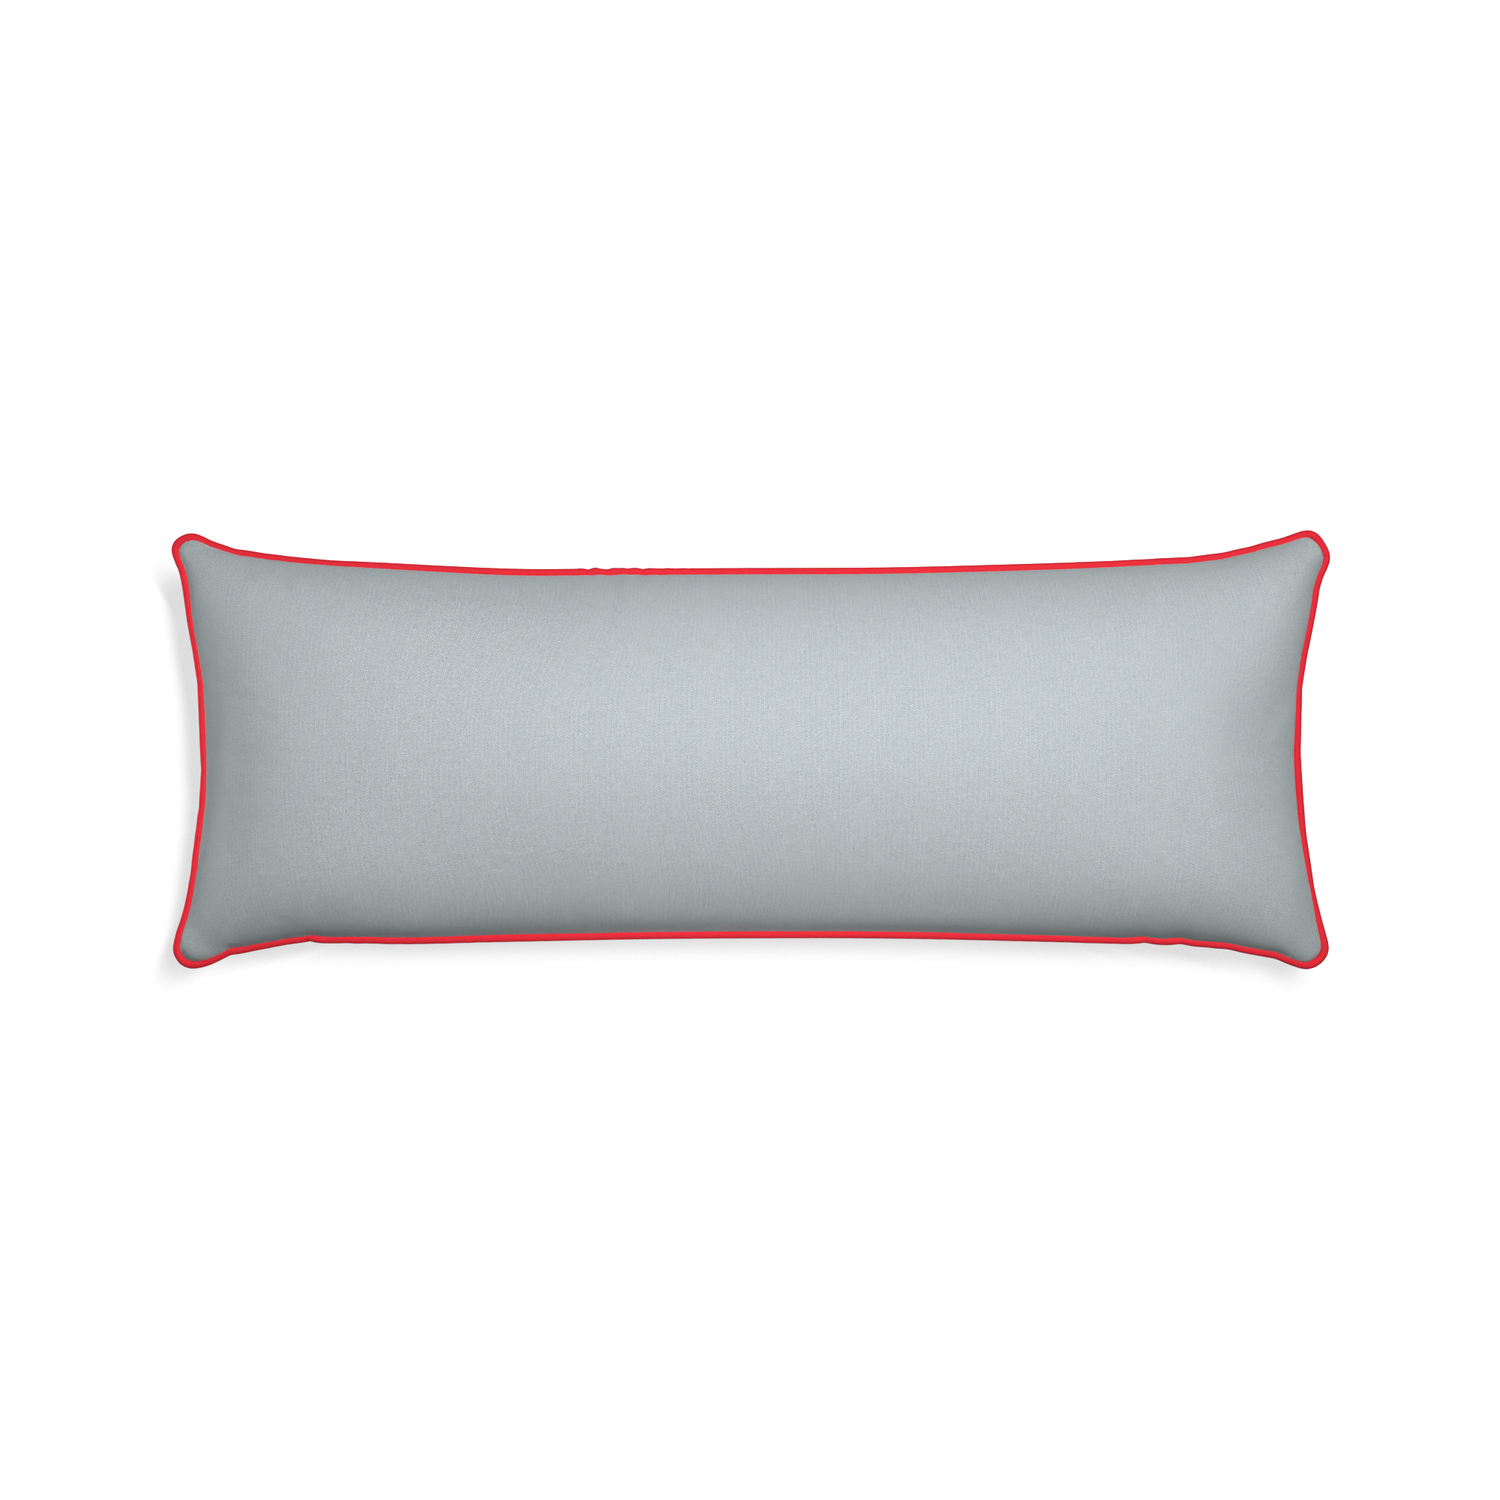 Xl-lumbar sea custom grey bluepillow with cherry piping on white background